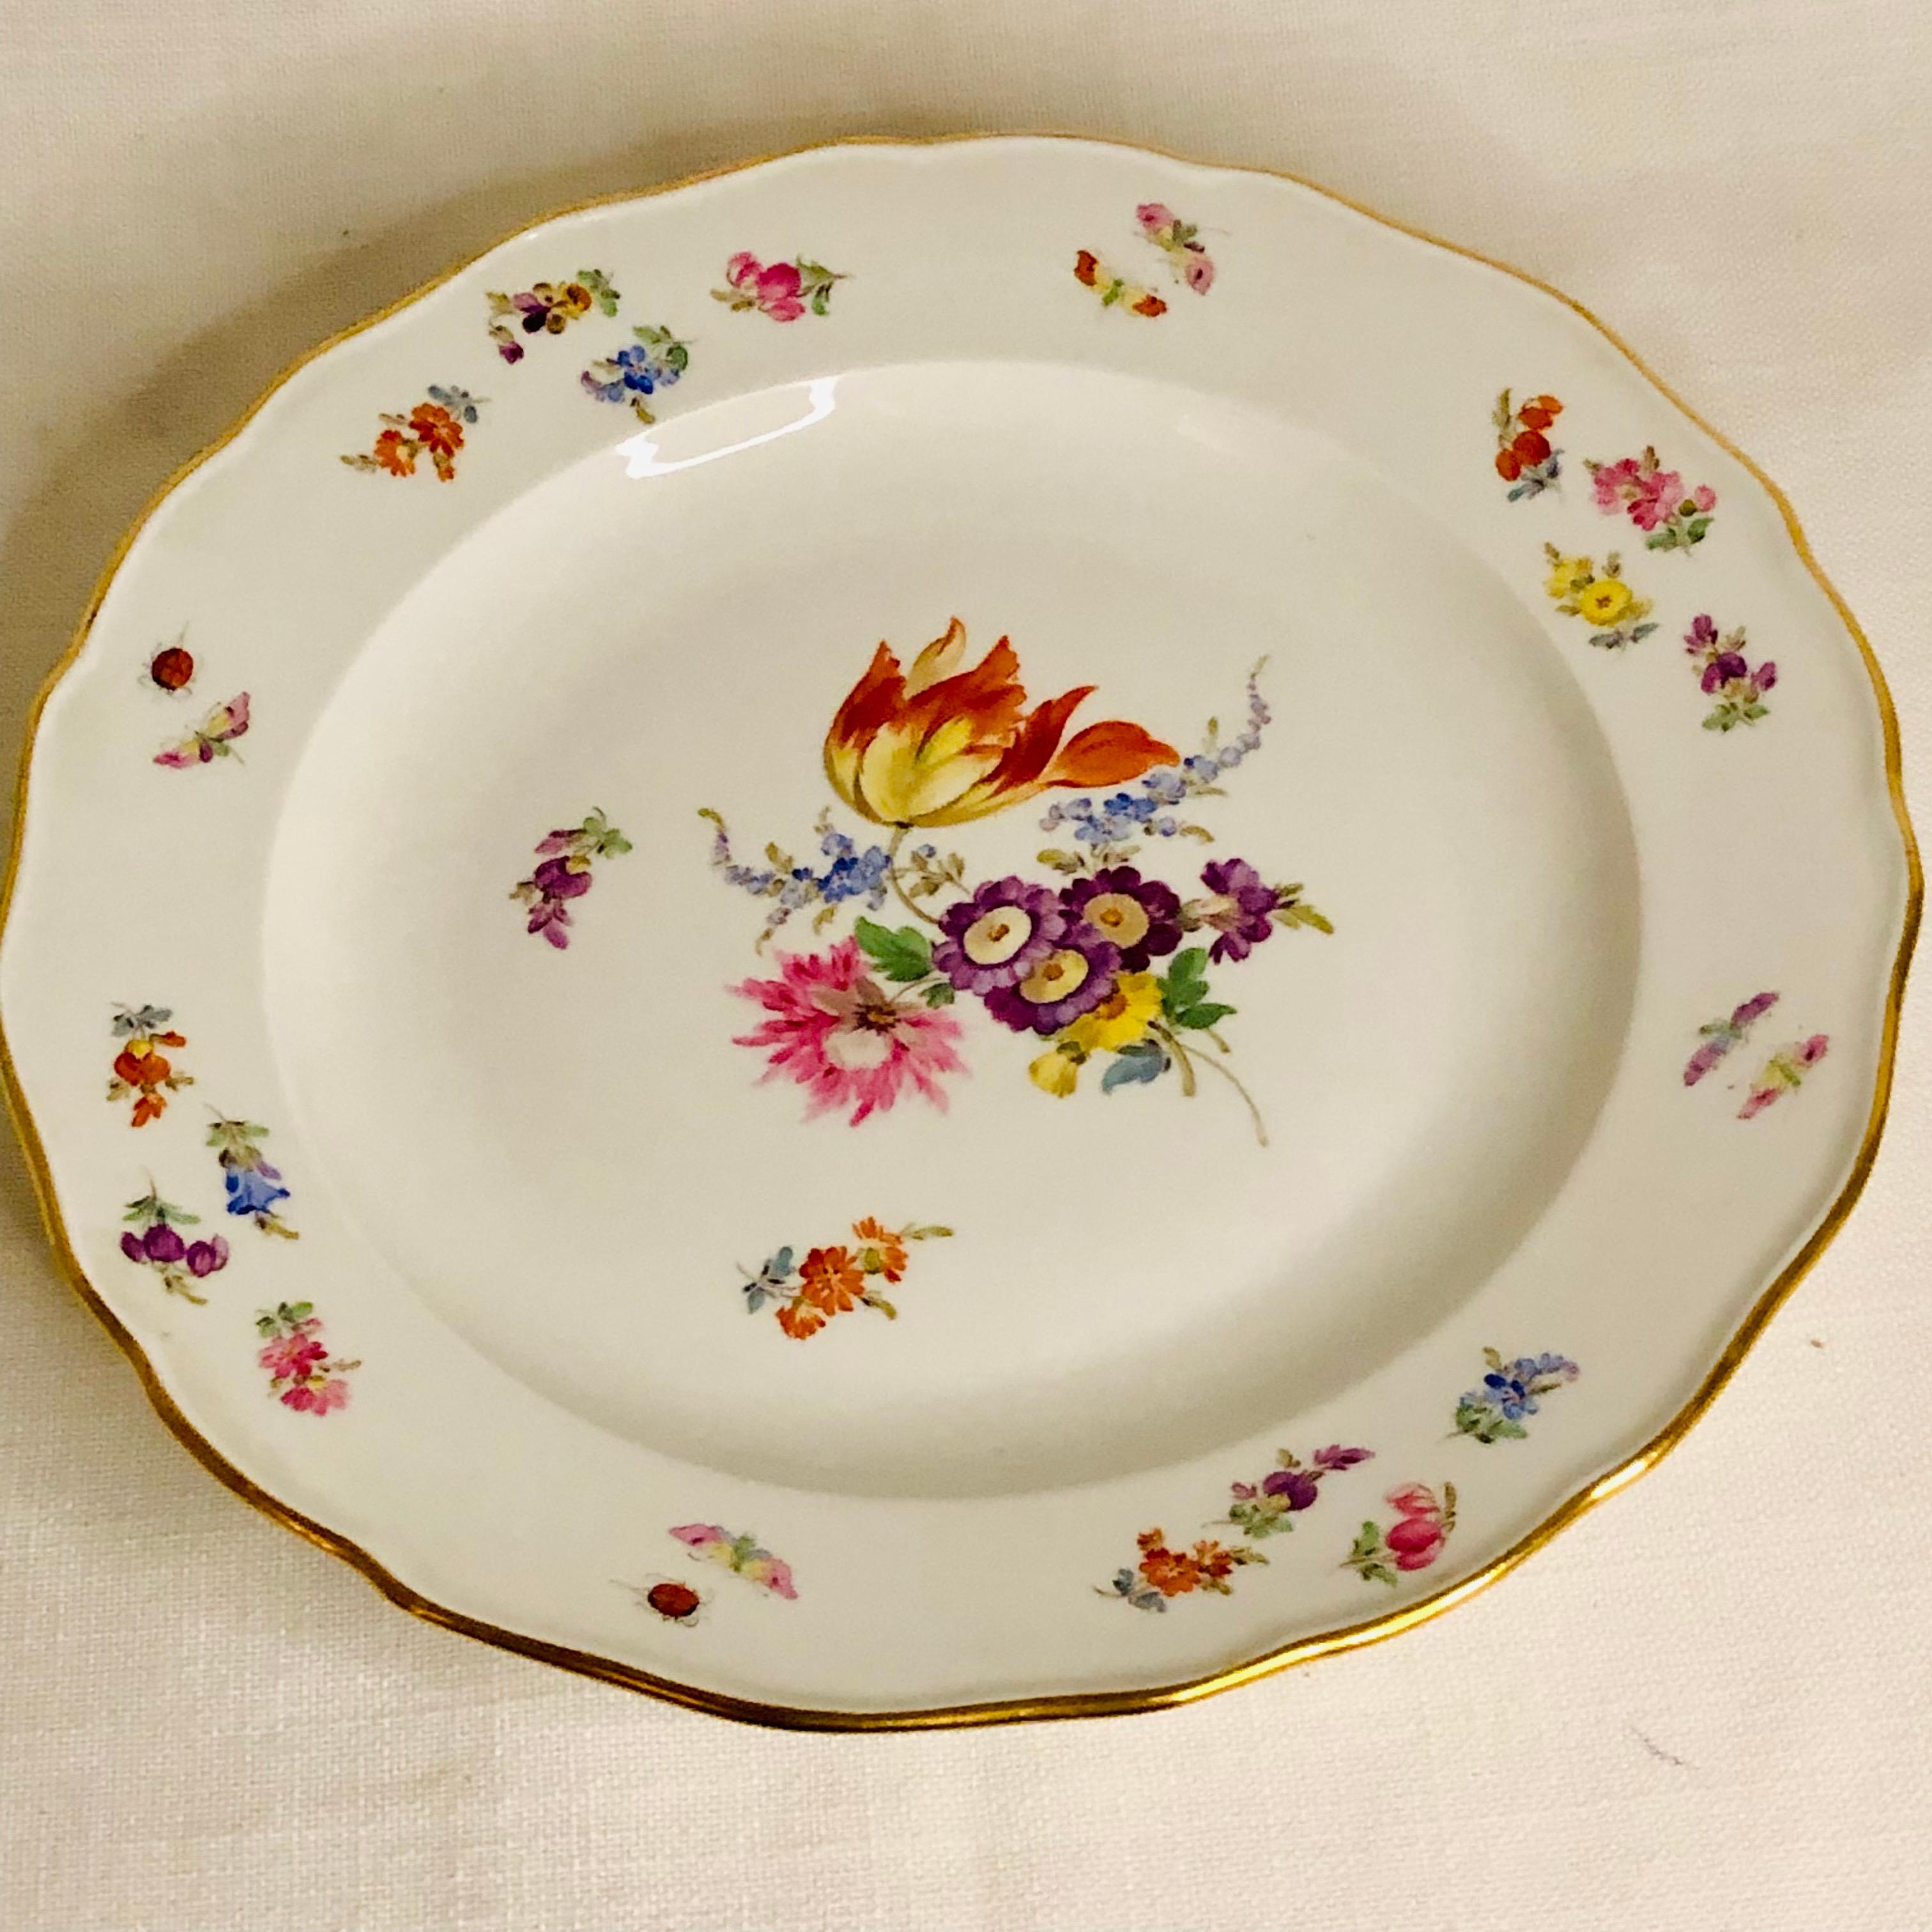 Romantic Set of 12 Meissen Dinner Plates Each Painted with a Different Bouquet of Flowers